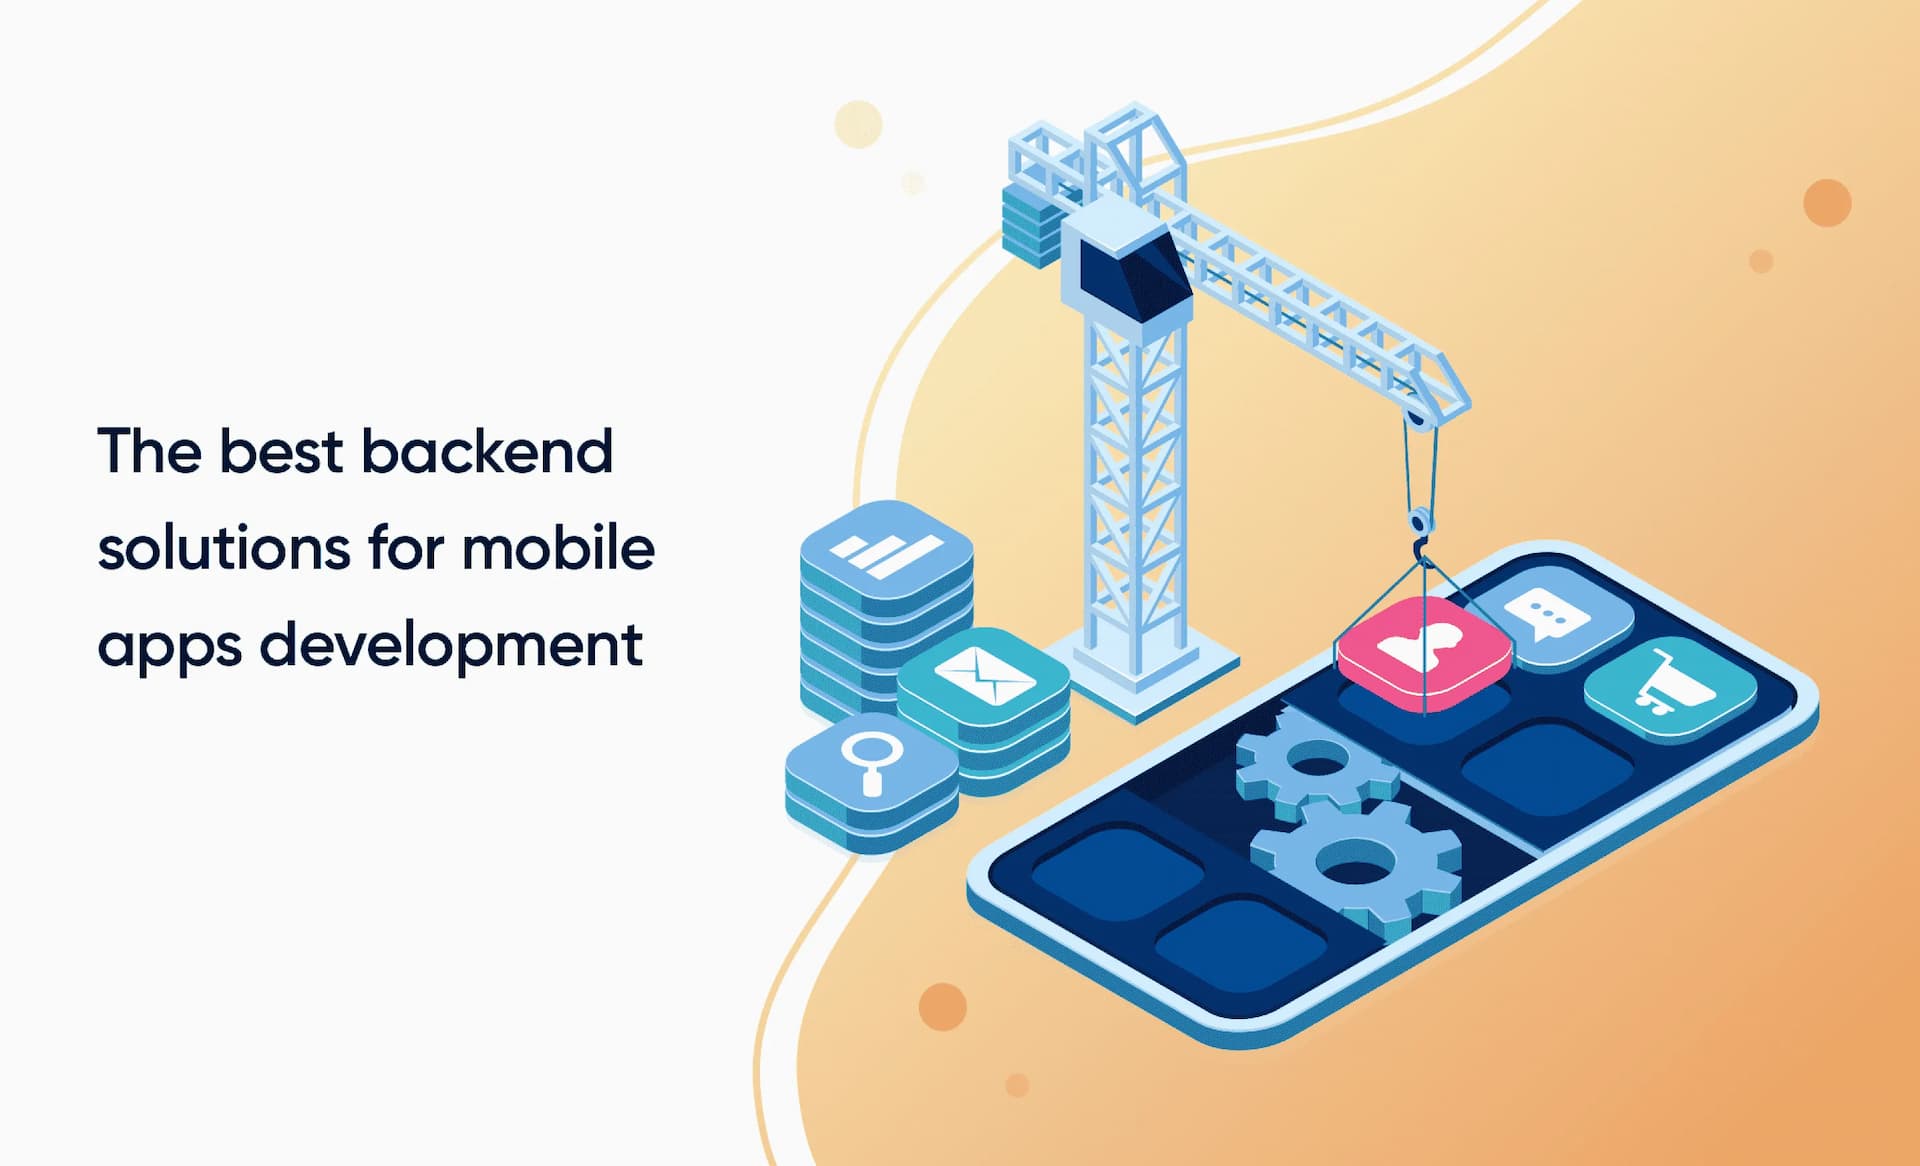 The best backend solutions for mobile apps development